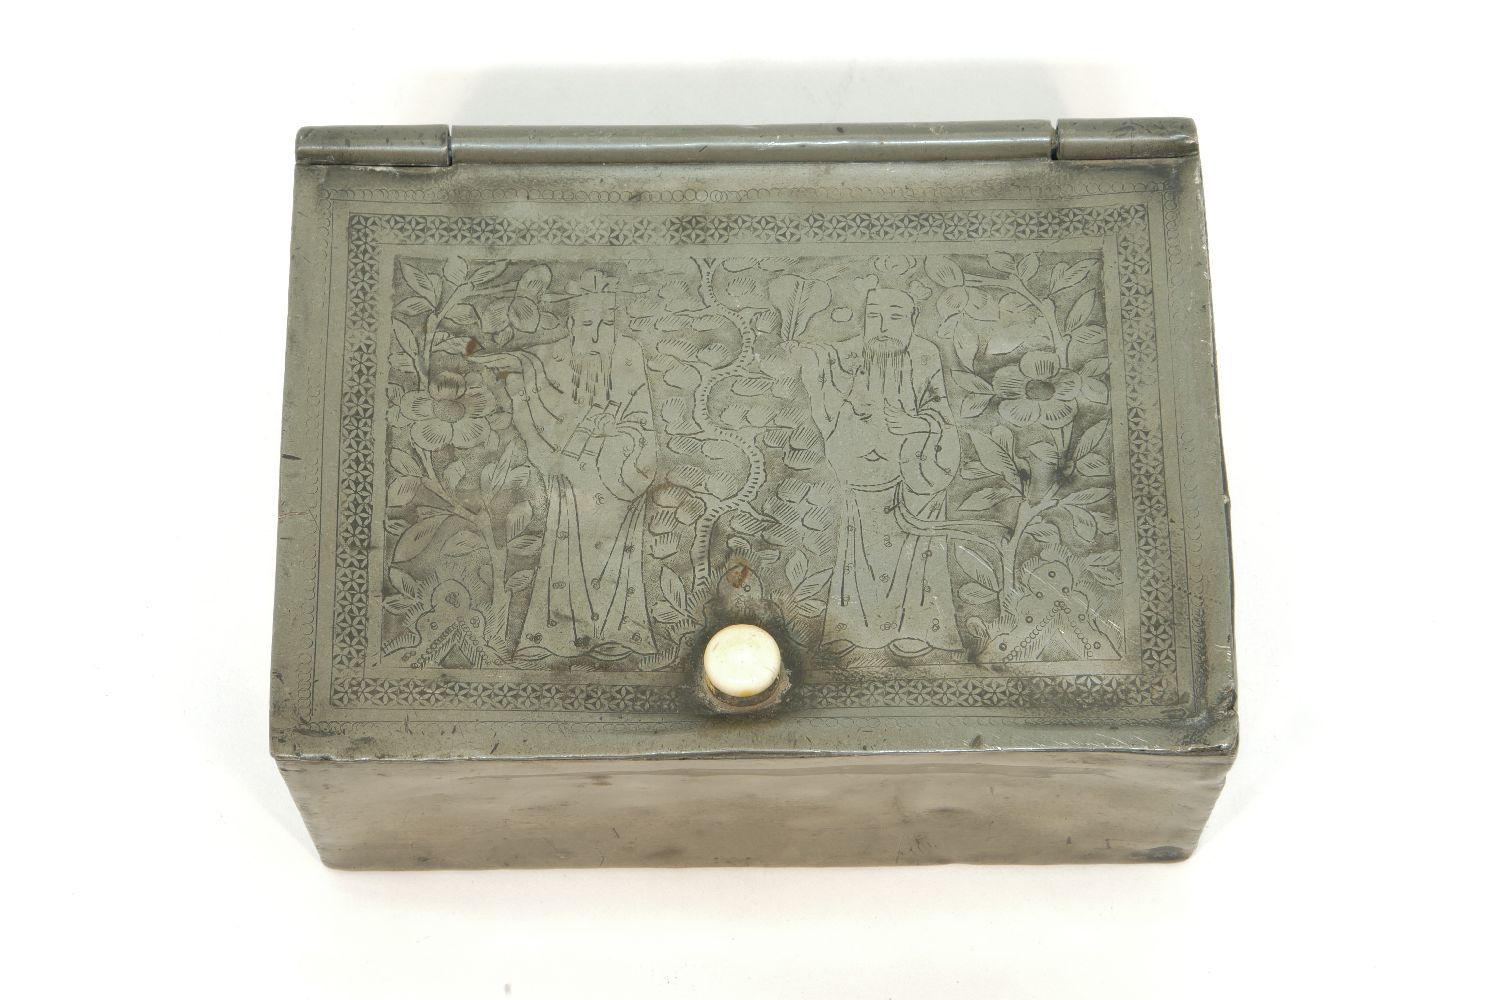 A silver box engraved with Chinese figures, with ivory knob, 19th century100